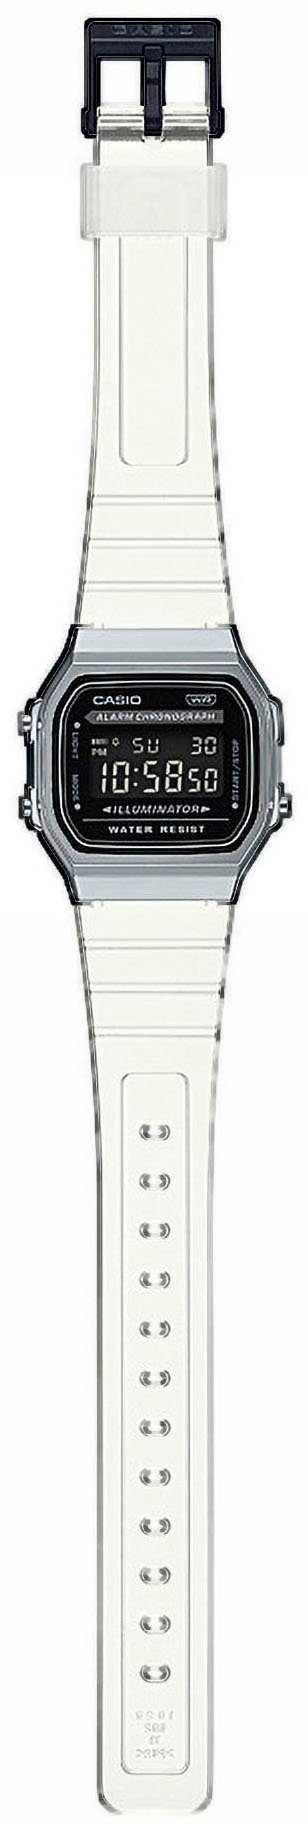 Trendstarker CASIO A168XES-1BEF, Herrenchronograph Chronograph VINTAGE